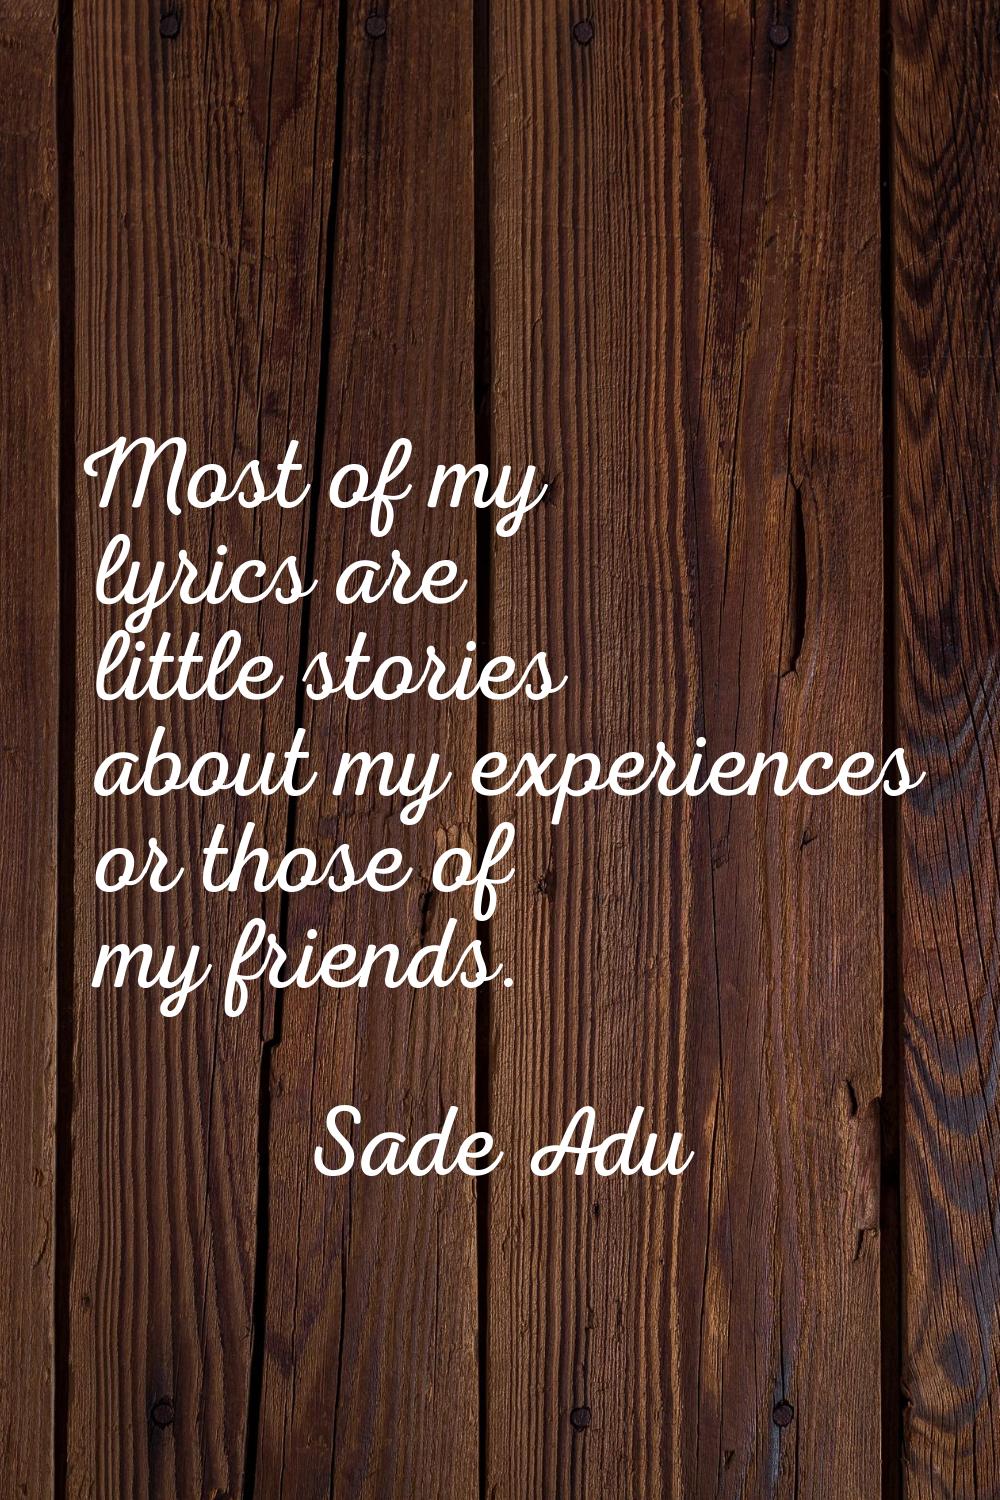 Most of my lyrics are little stories about my experiences or those of my friends.